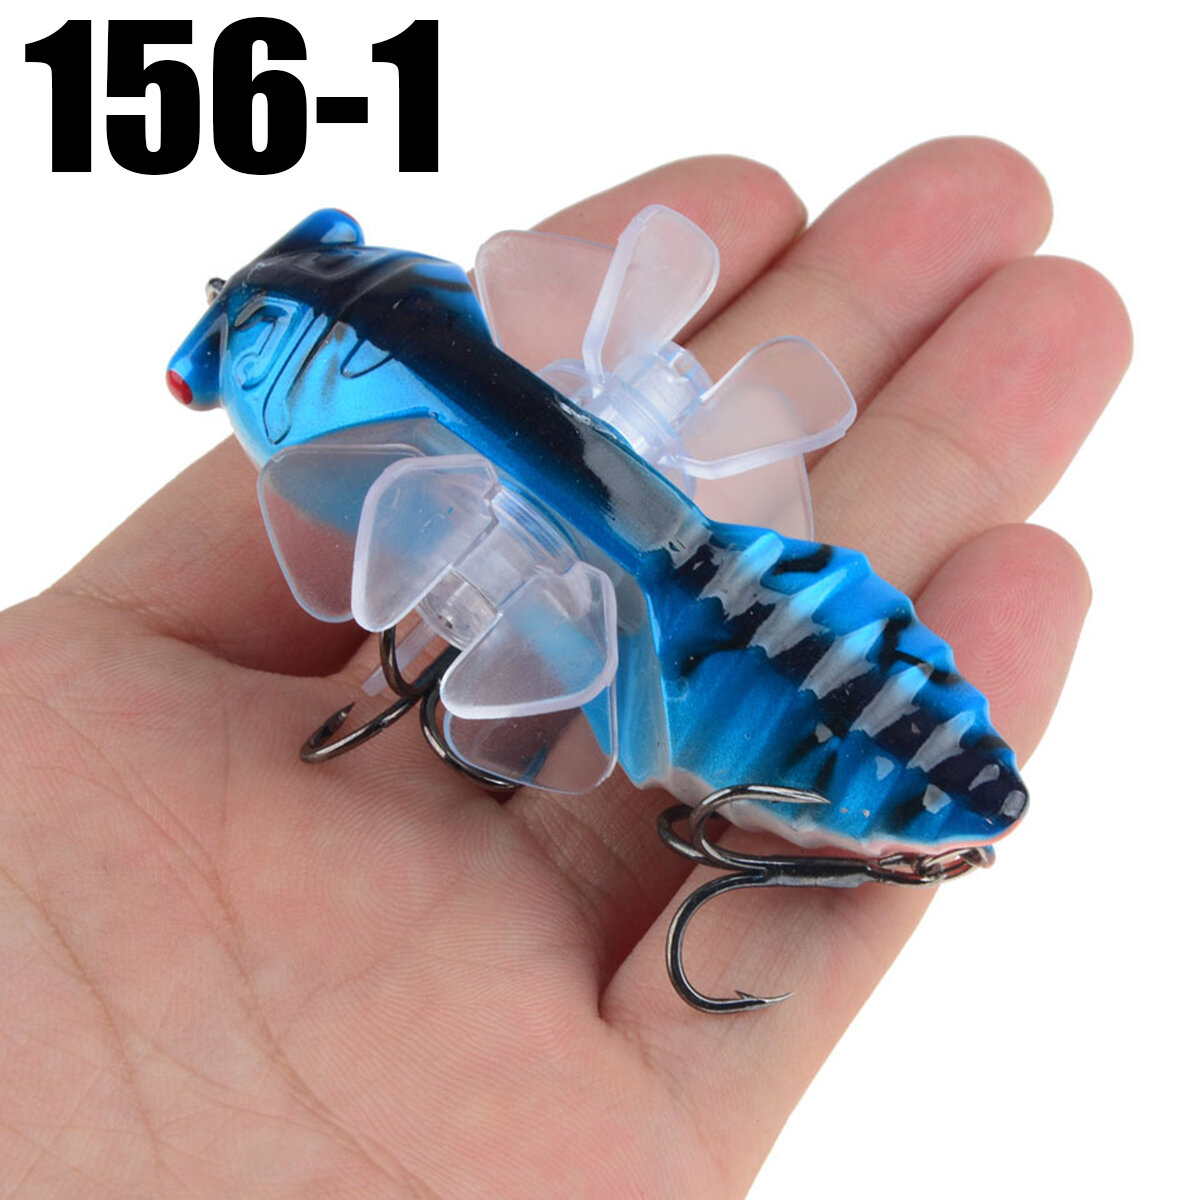 ZANLURE 1PSC 7.5cm Artificial Bait Fishing Lure Insect Rotating Wings Swimbait Fishing Hook